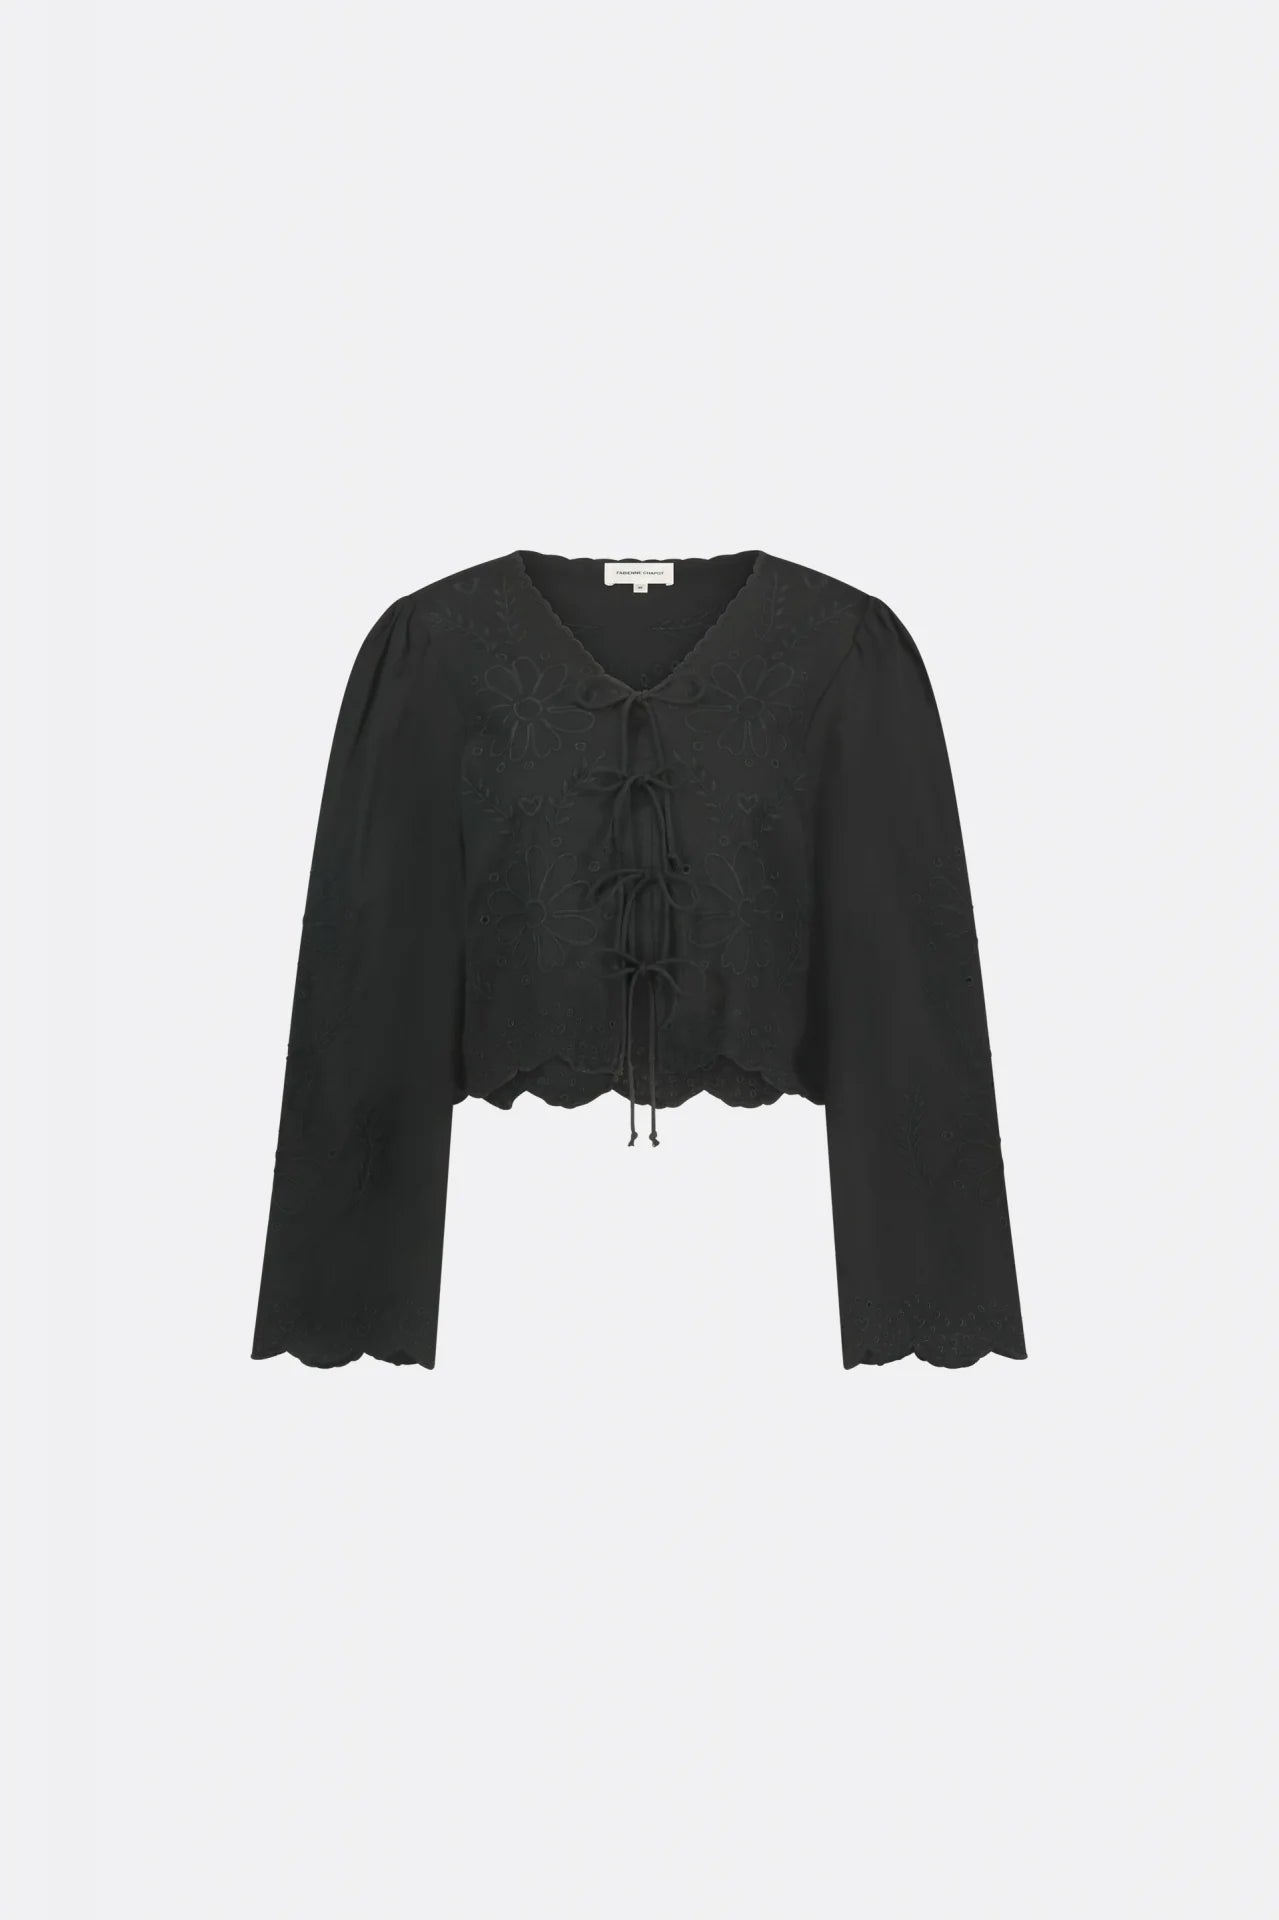 A Sterre Top - Black from Fabienne Chapot with lace detailing for a feminine look.